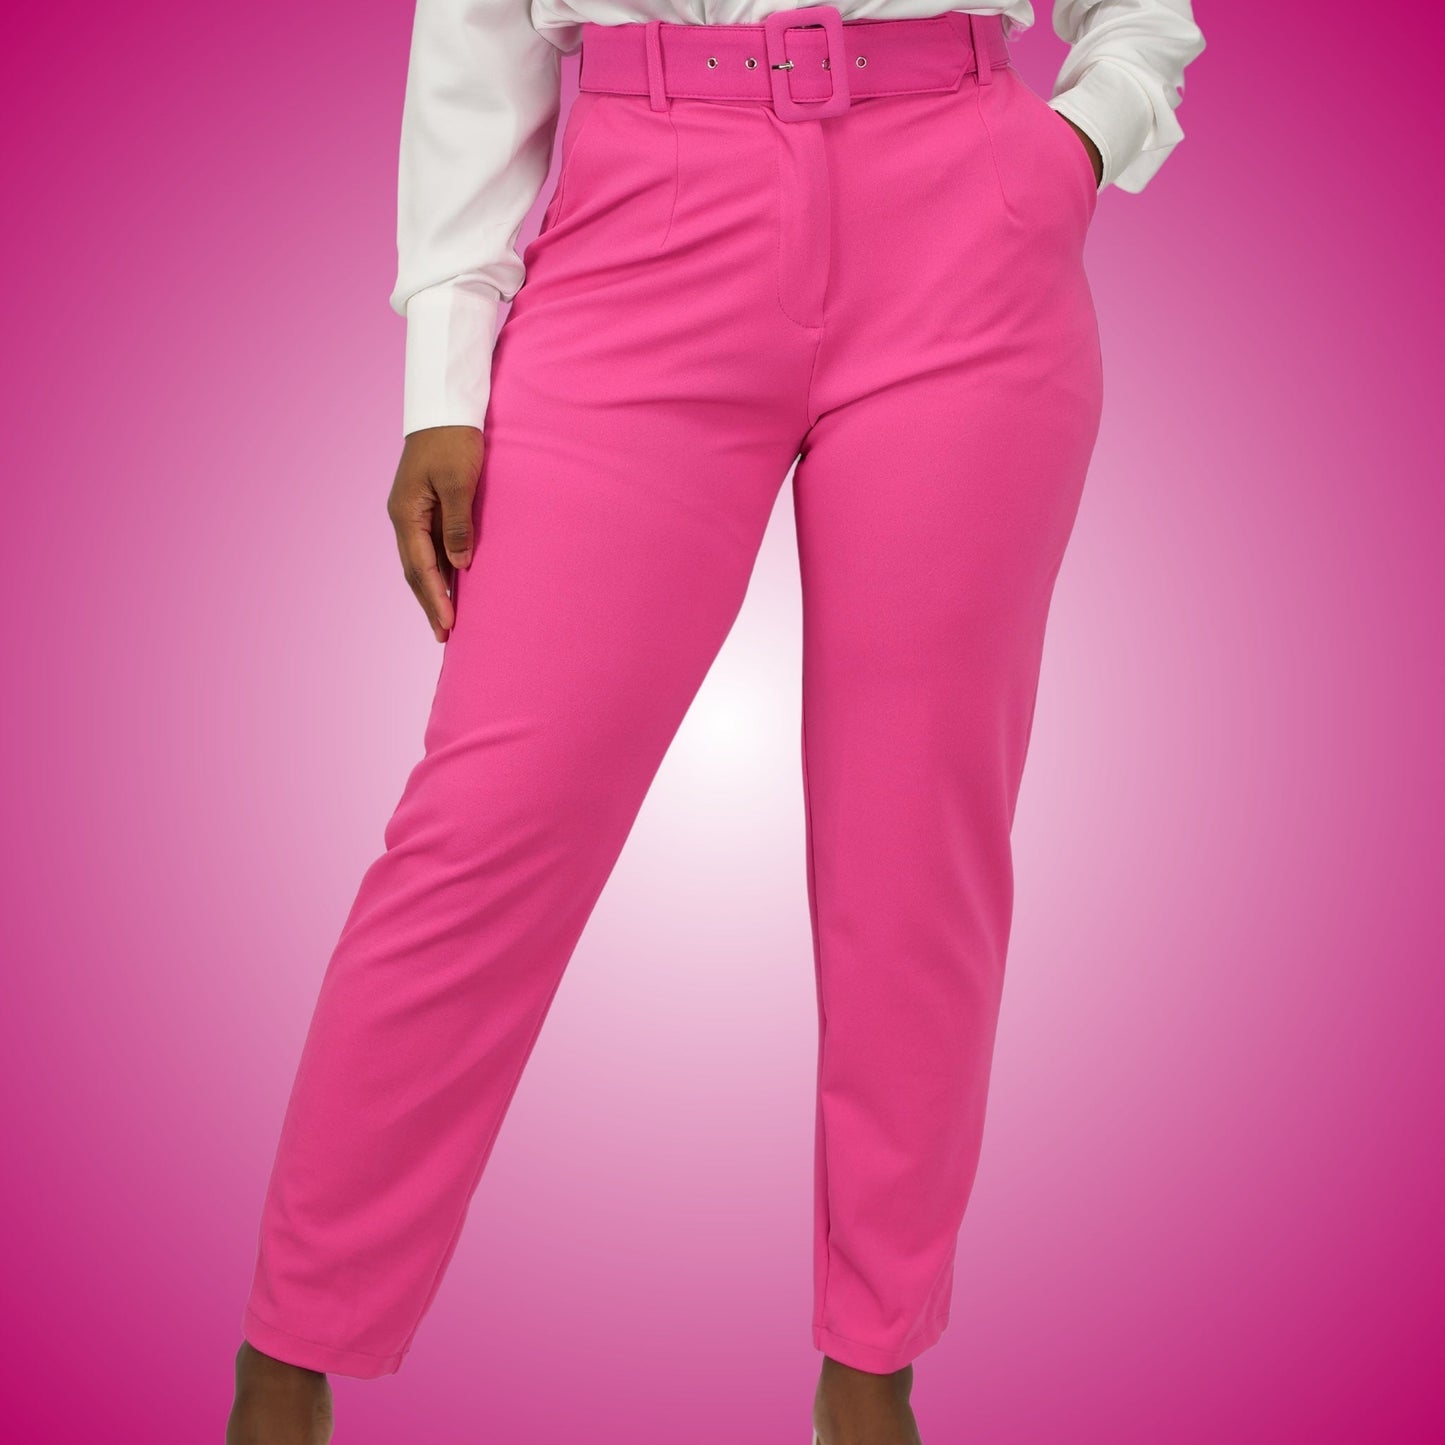 Sasha Ankle Women's Dress Pants - Blossom Pink Pants Mo'Nique Couture Fashions Small Blossom Pink 